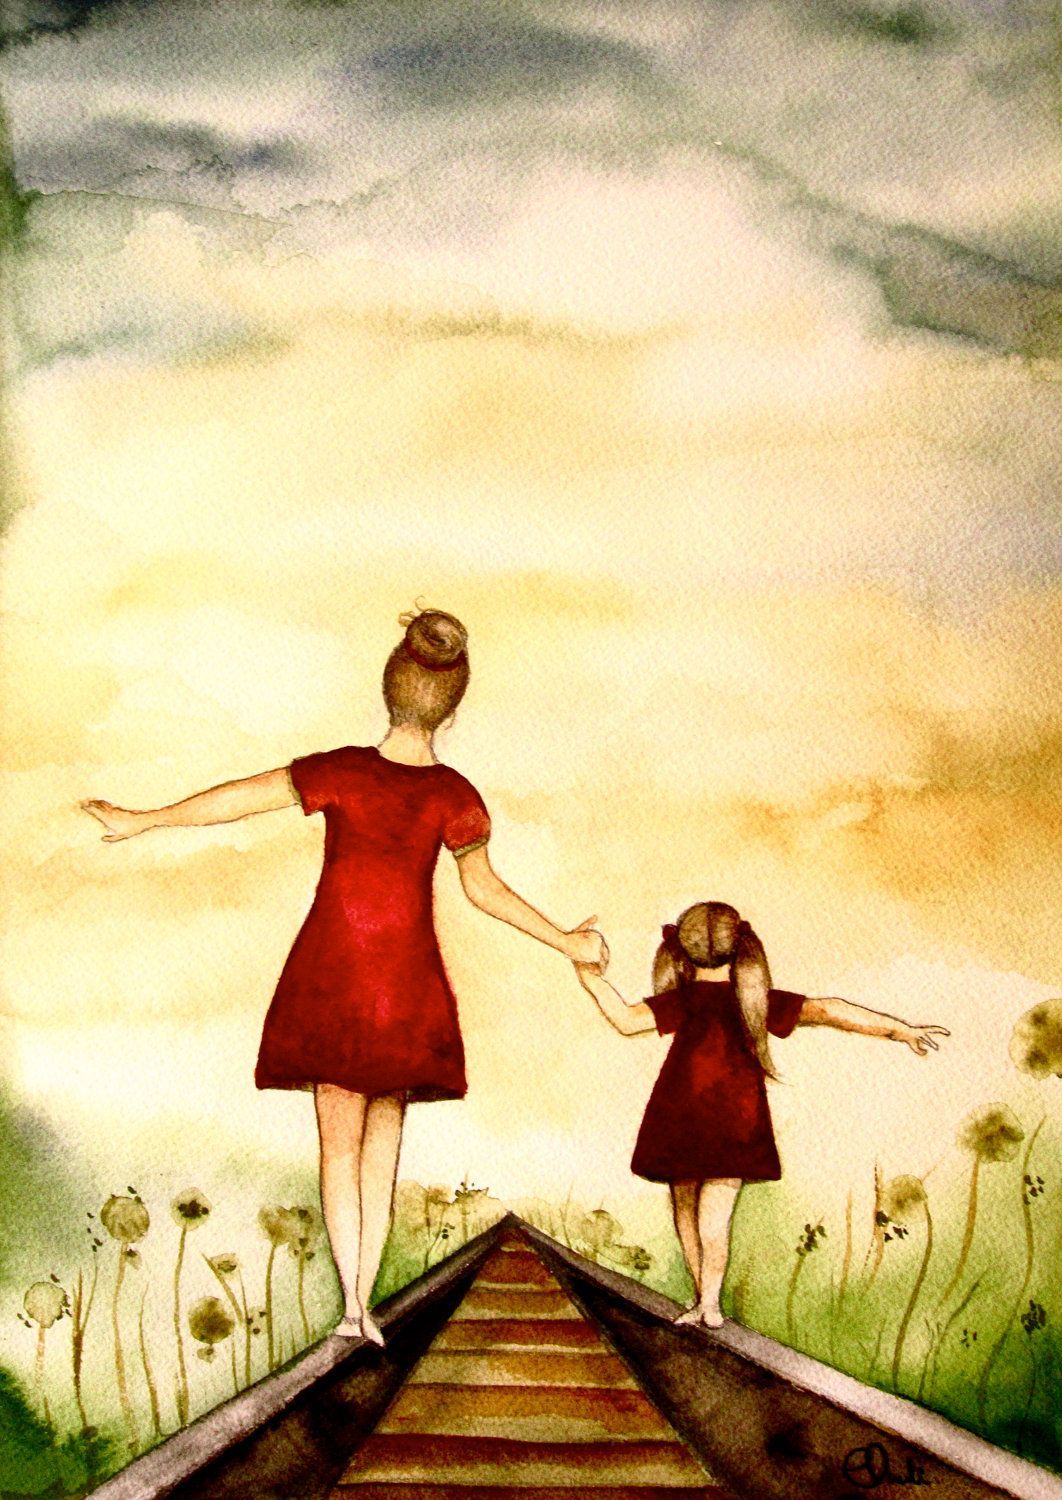 Mother and blonde daughter our walk art print. Art print gifts